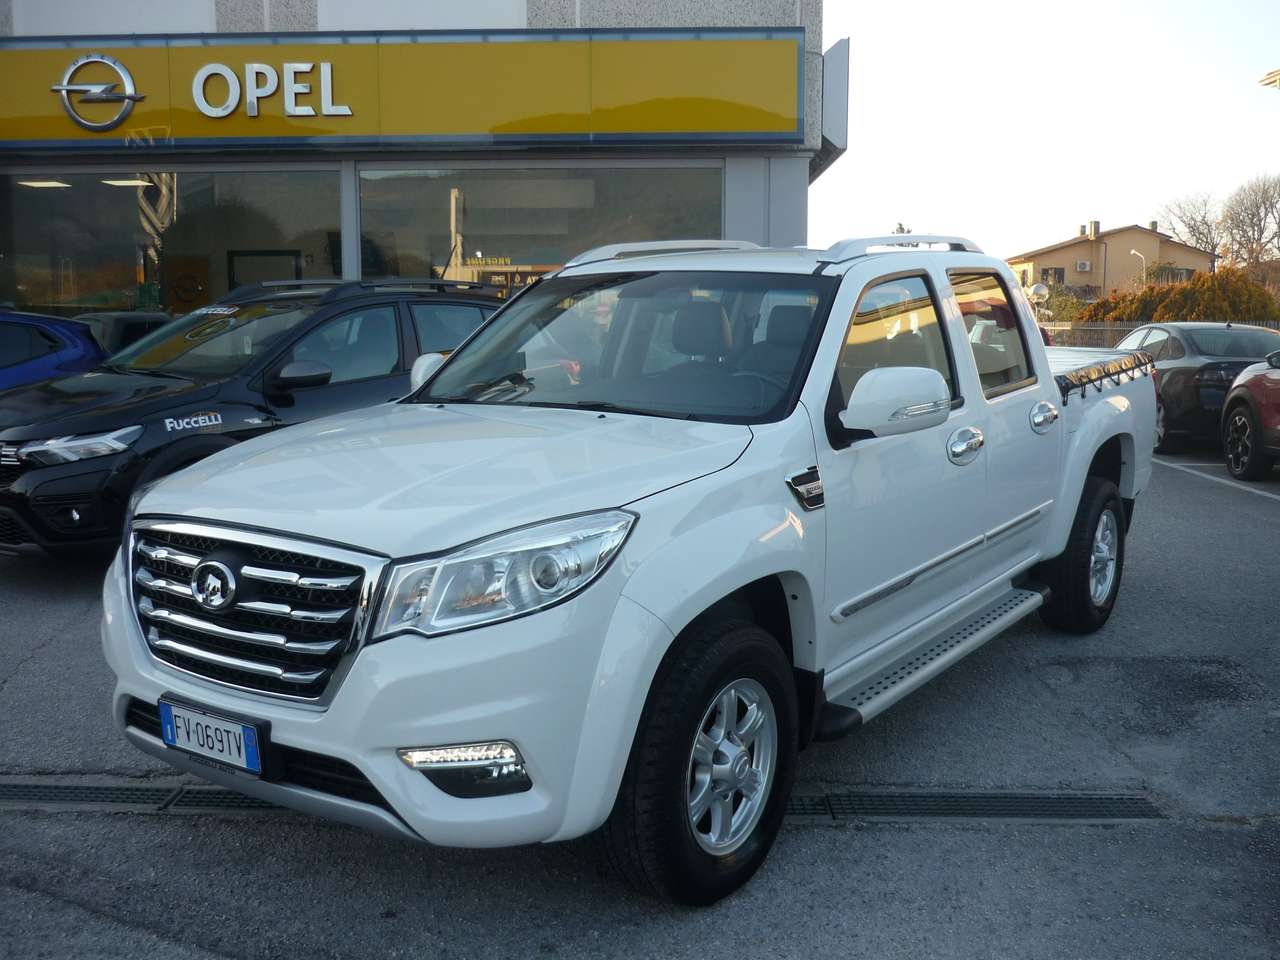 Great Wall Steed Steed6 DC 2.4 Premium Gpl 4wd